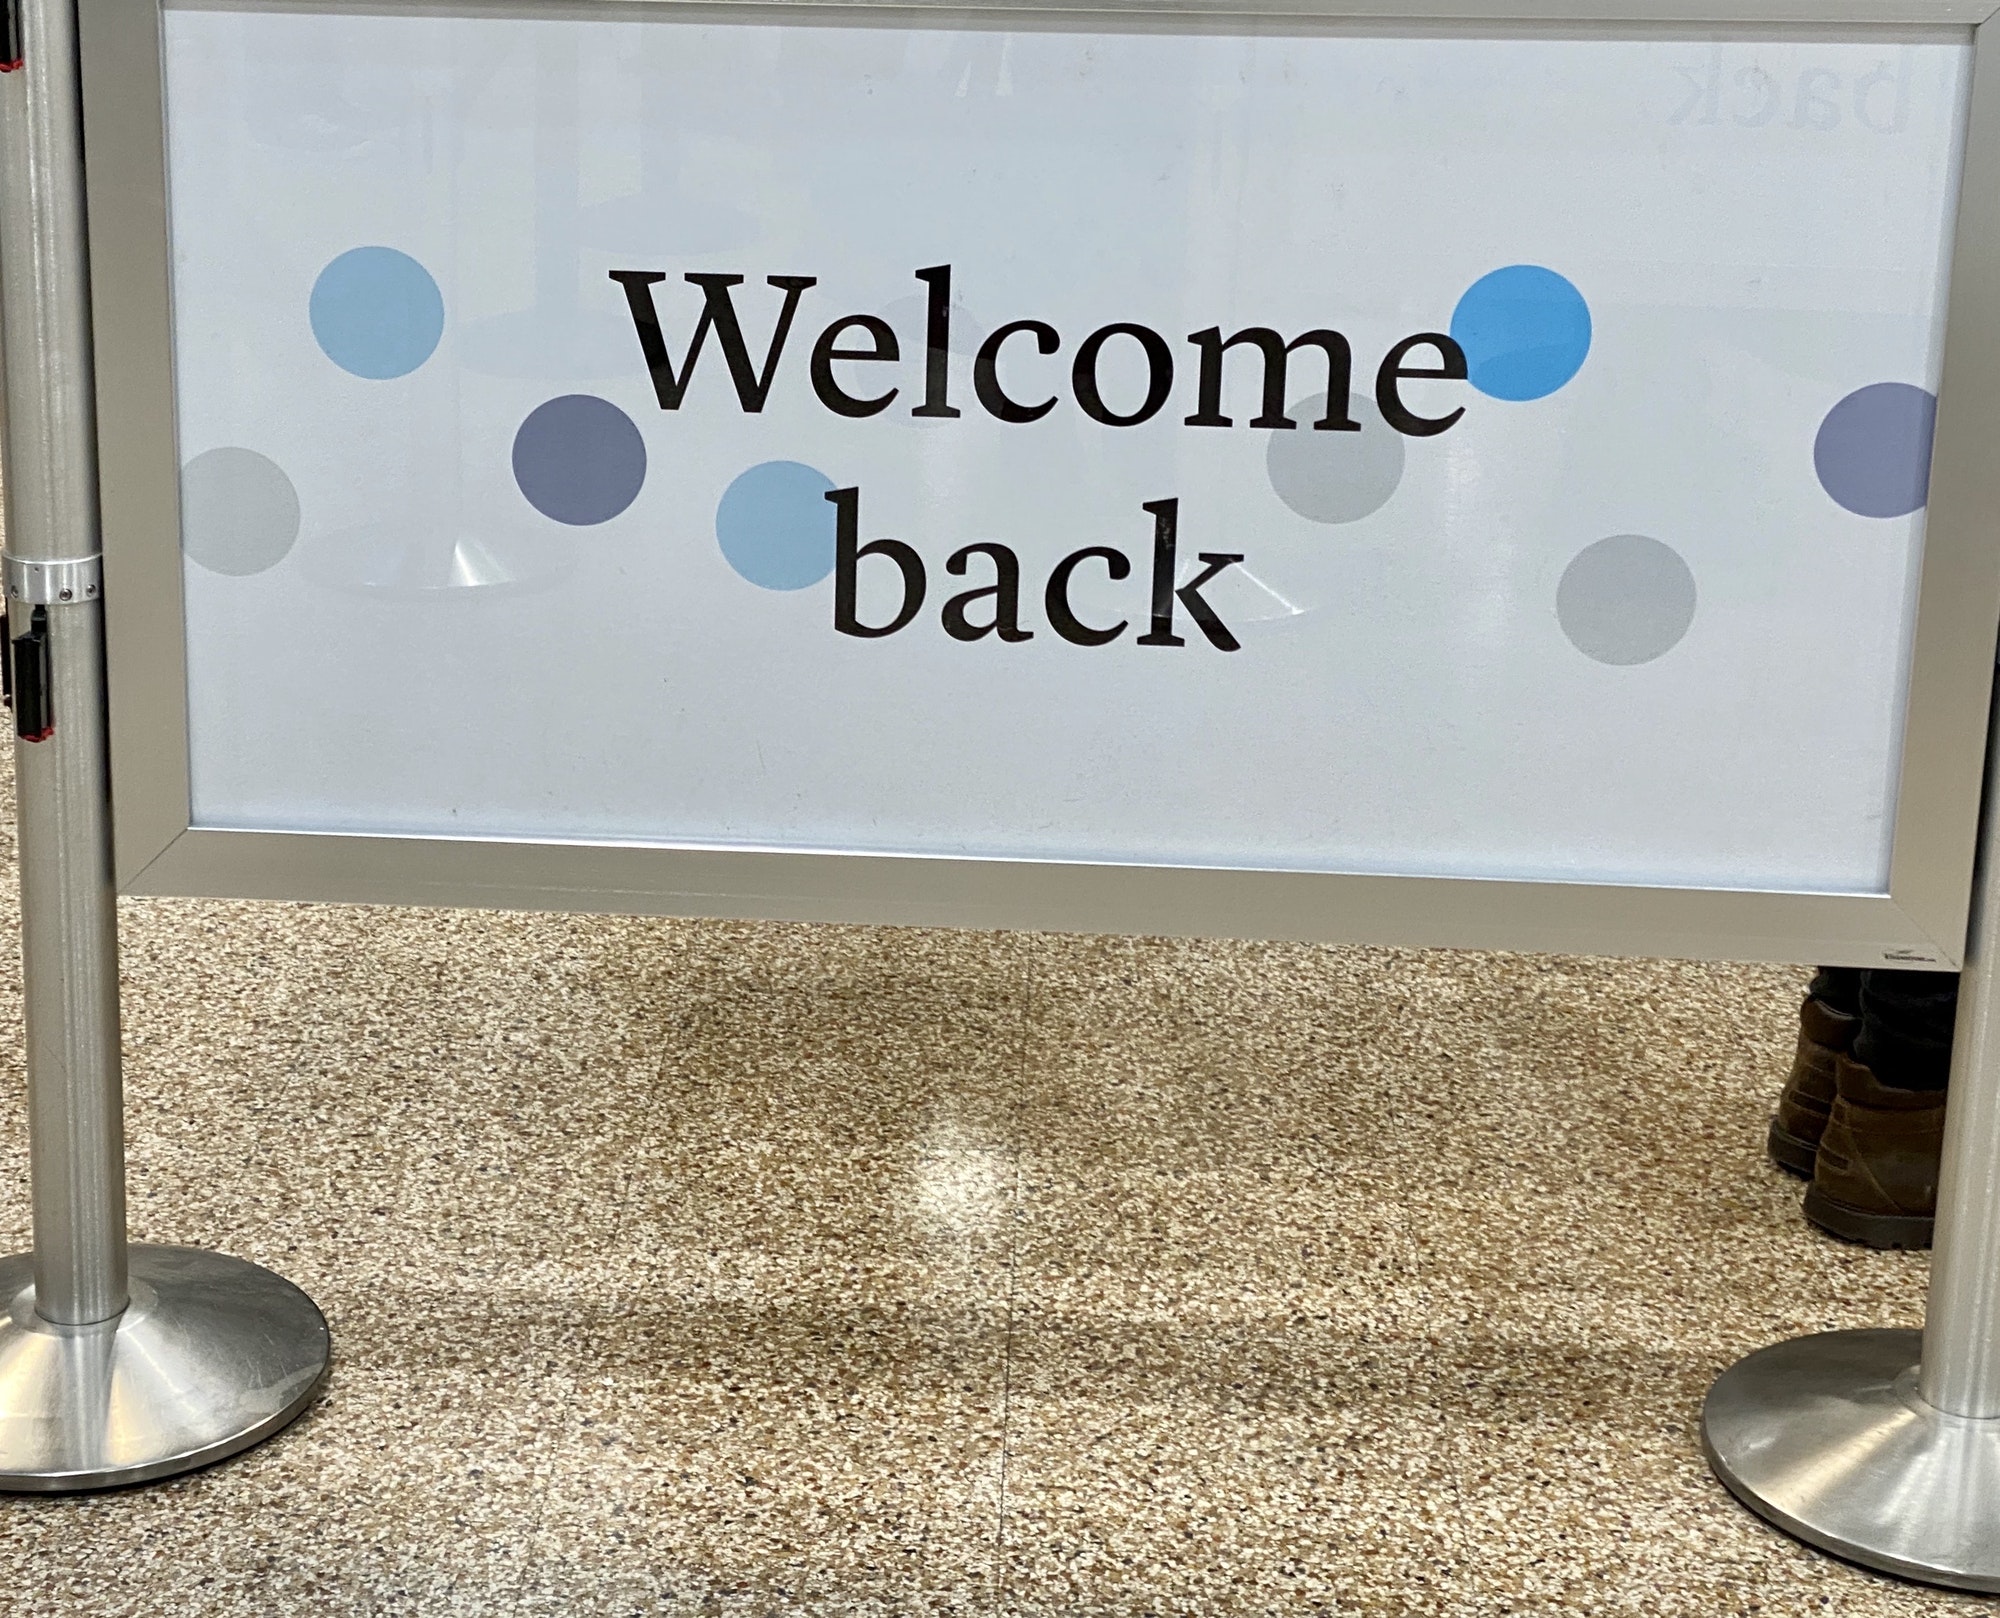 Sign says welcome back